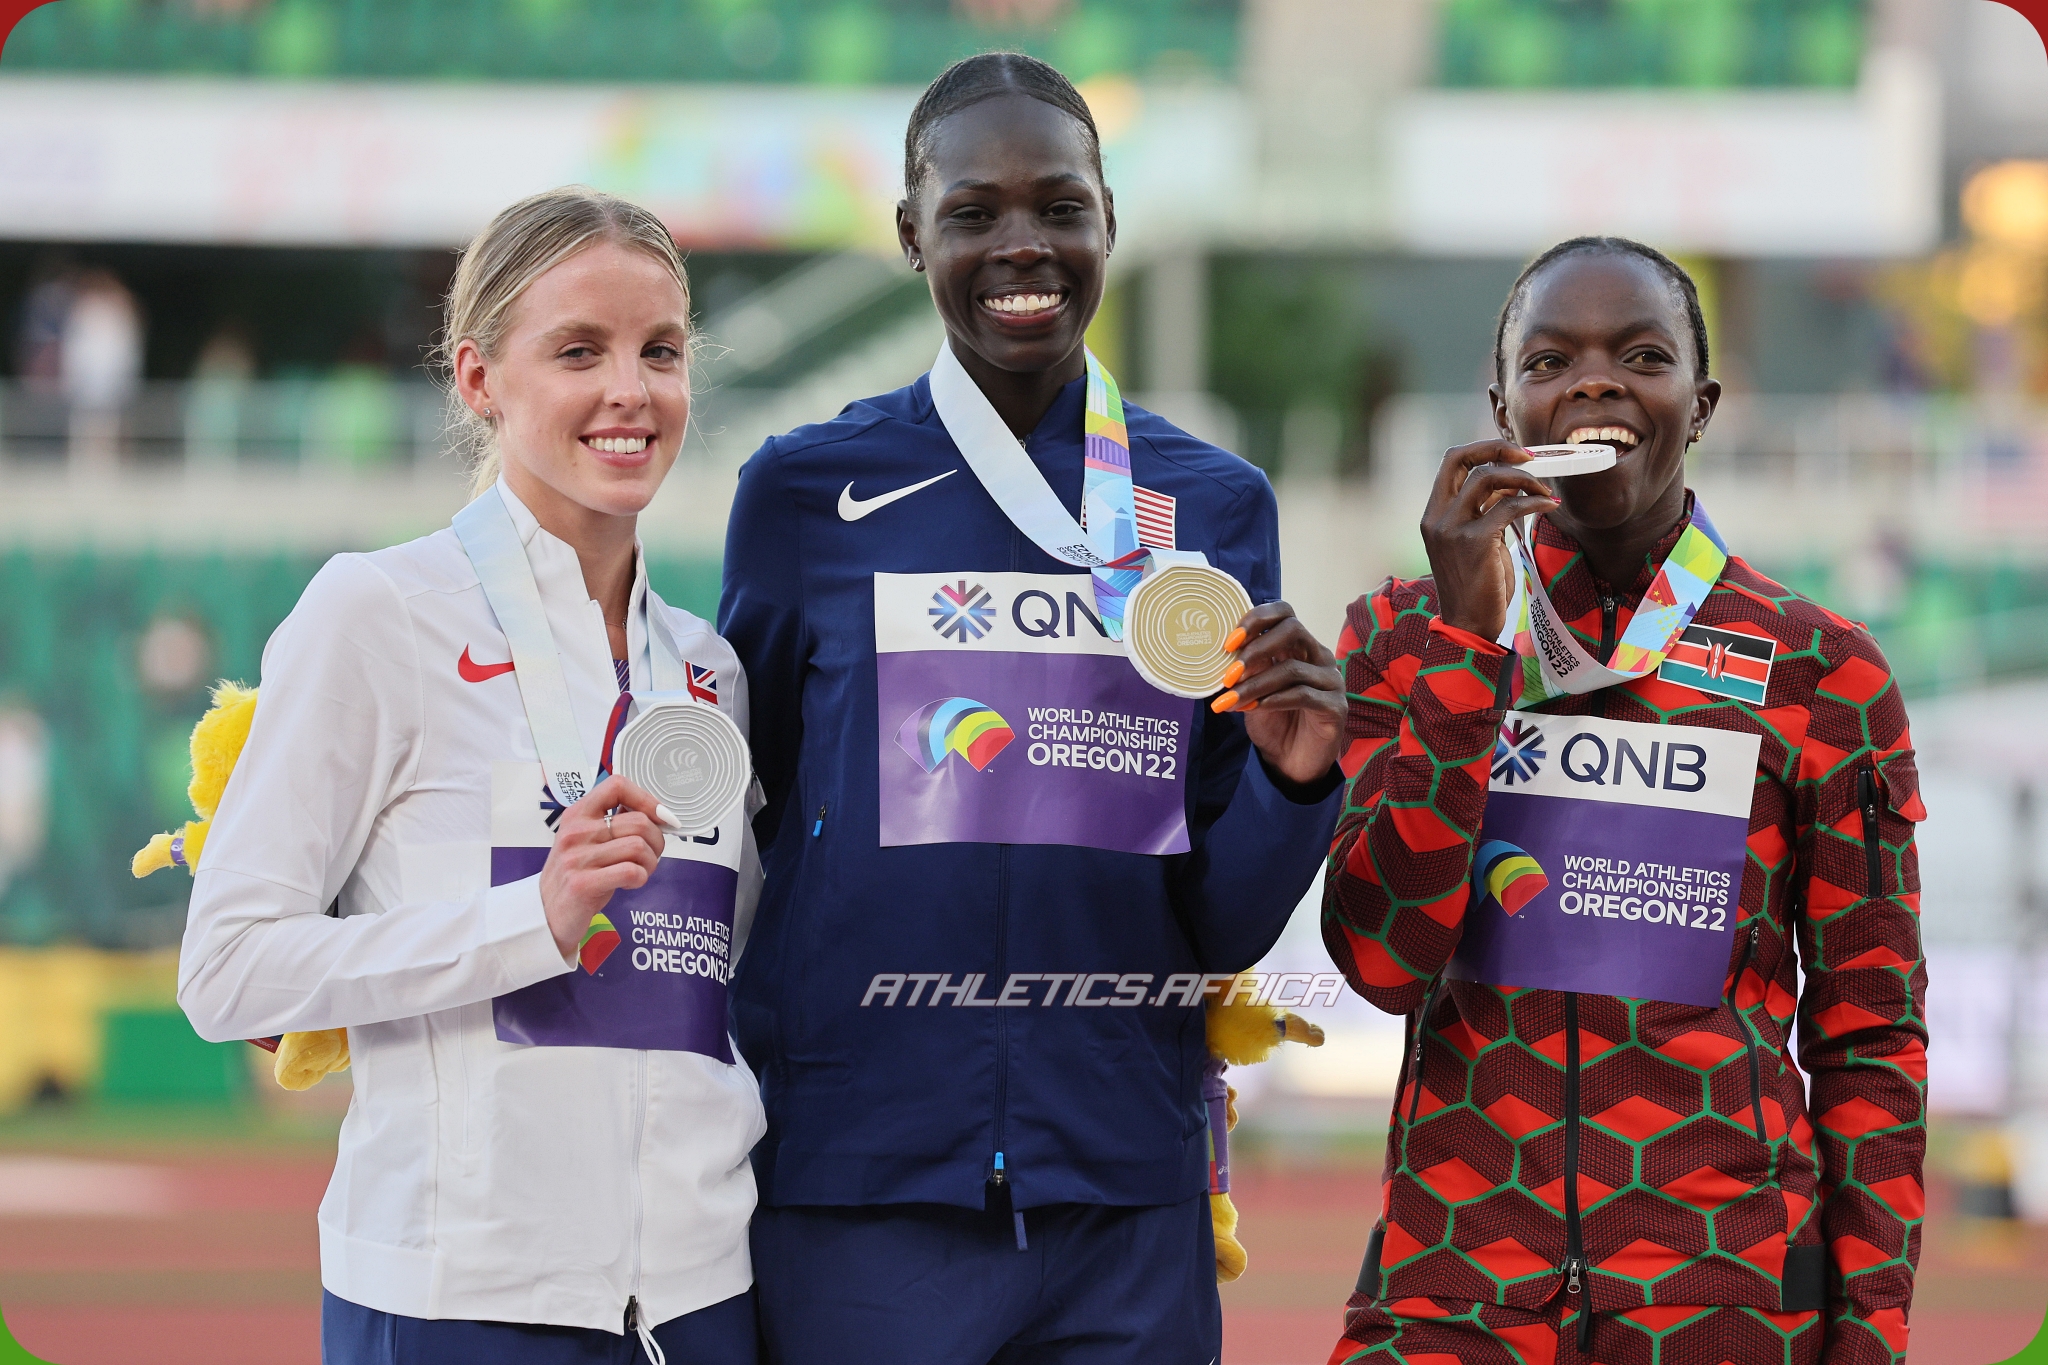 Silver medalist Keely Hodgkinson of Team Great Britain, gold medalist Athing Mu of Team United States, and bronze medalist Mary Moraa of Team Kenya pose during the medal ceremony for the Women's 800m on day ten of the World Athletics Championships Oregon22 at Hayward Field on July 24, 2022 in Eugene, Oregon. (Photo by Andy Lyons/Getty Images for World Athletics)